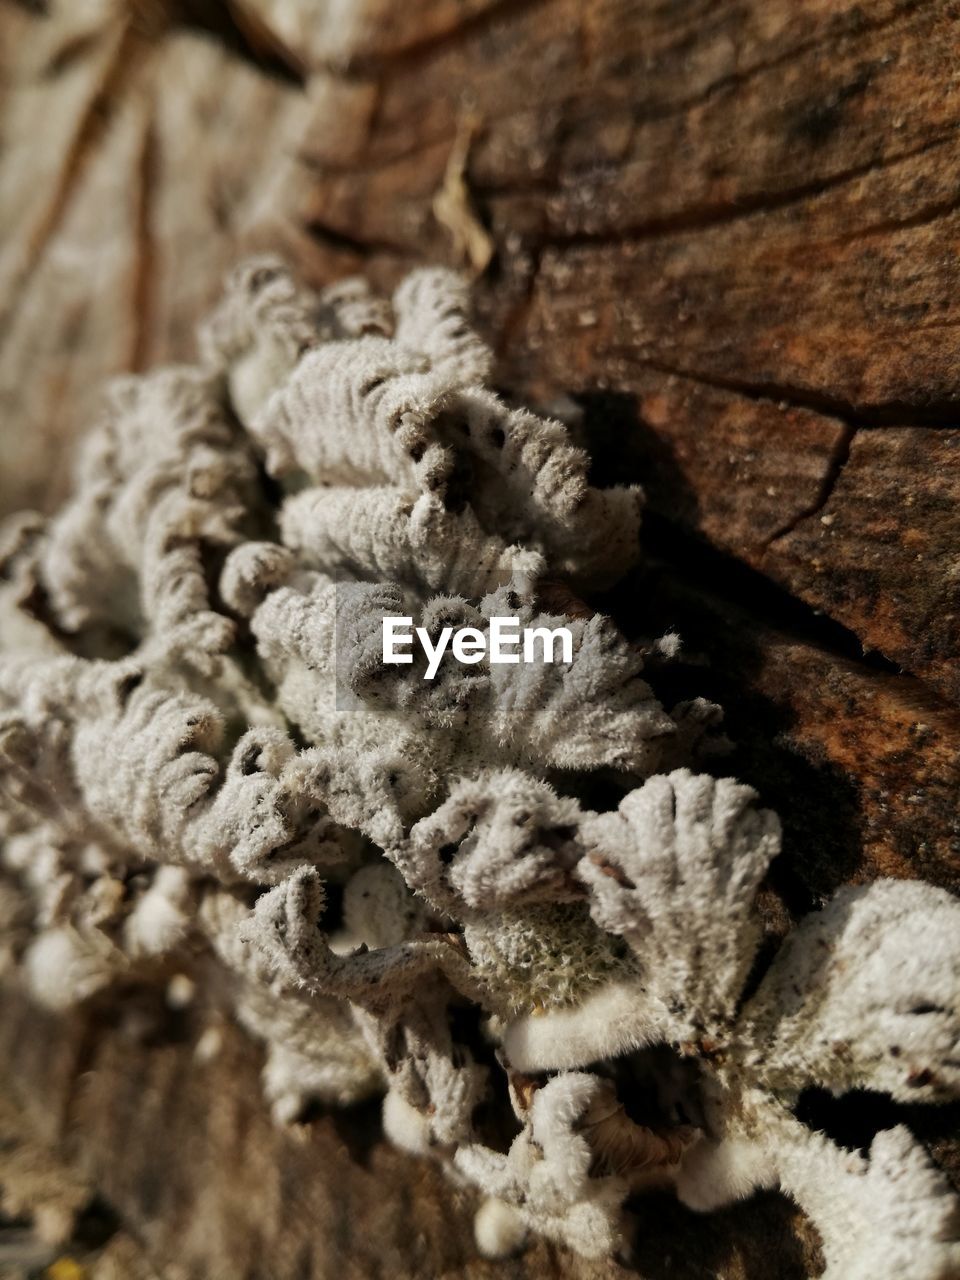 Close-up of fungus growing on wood